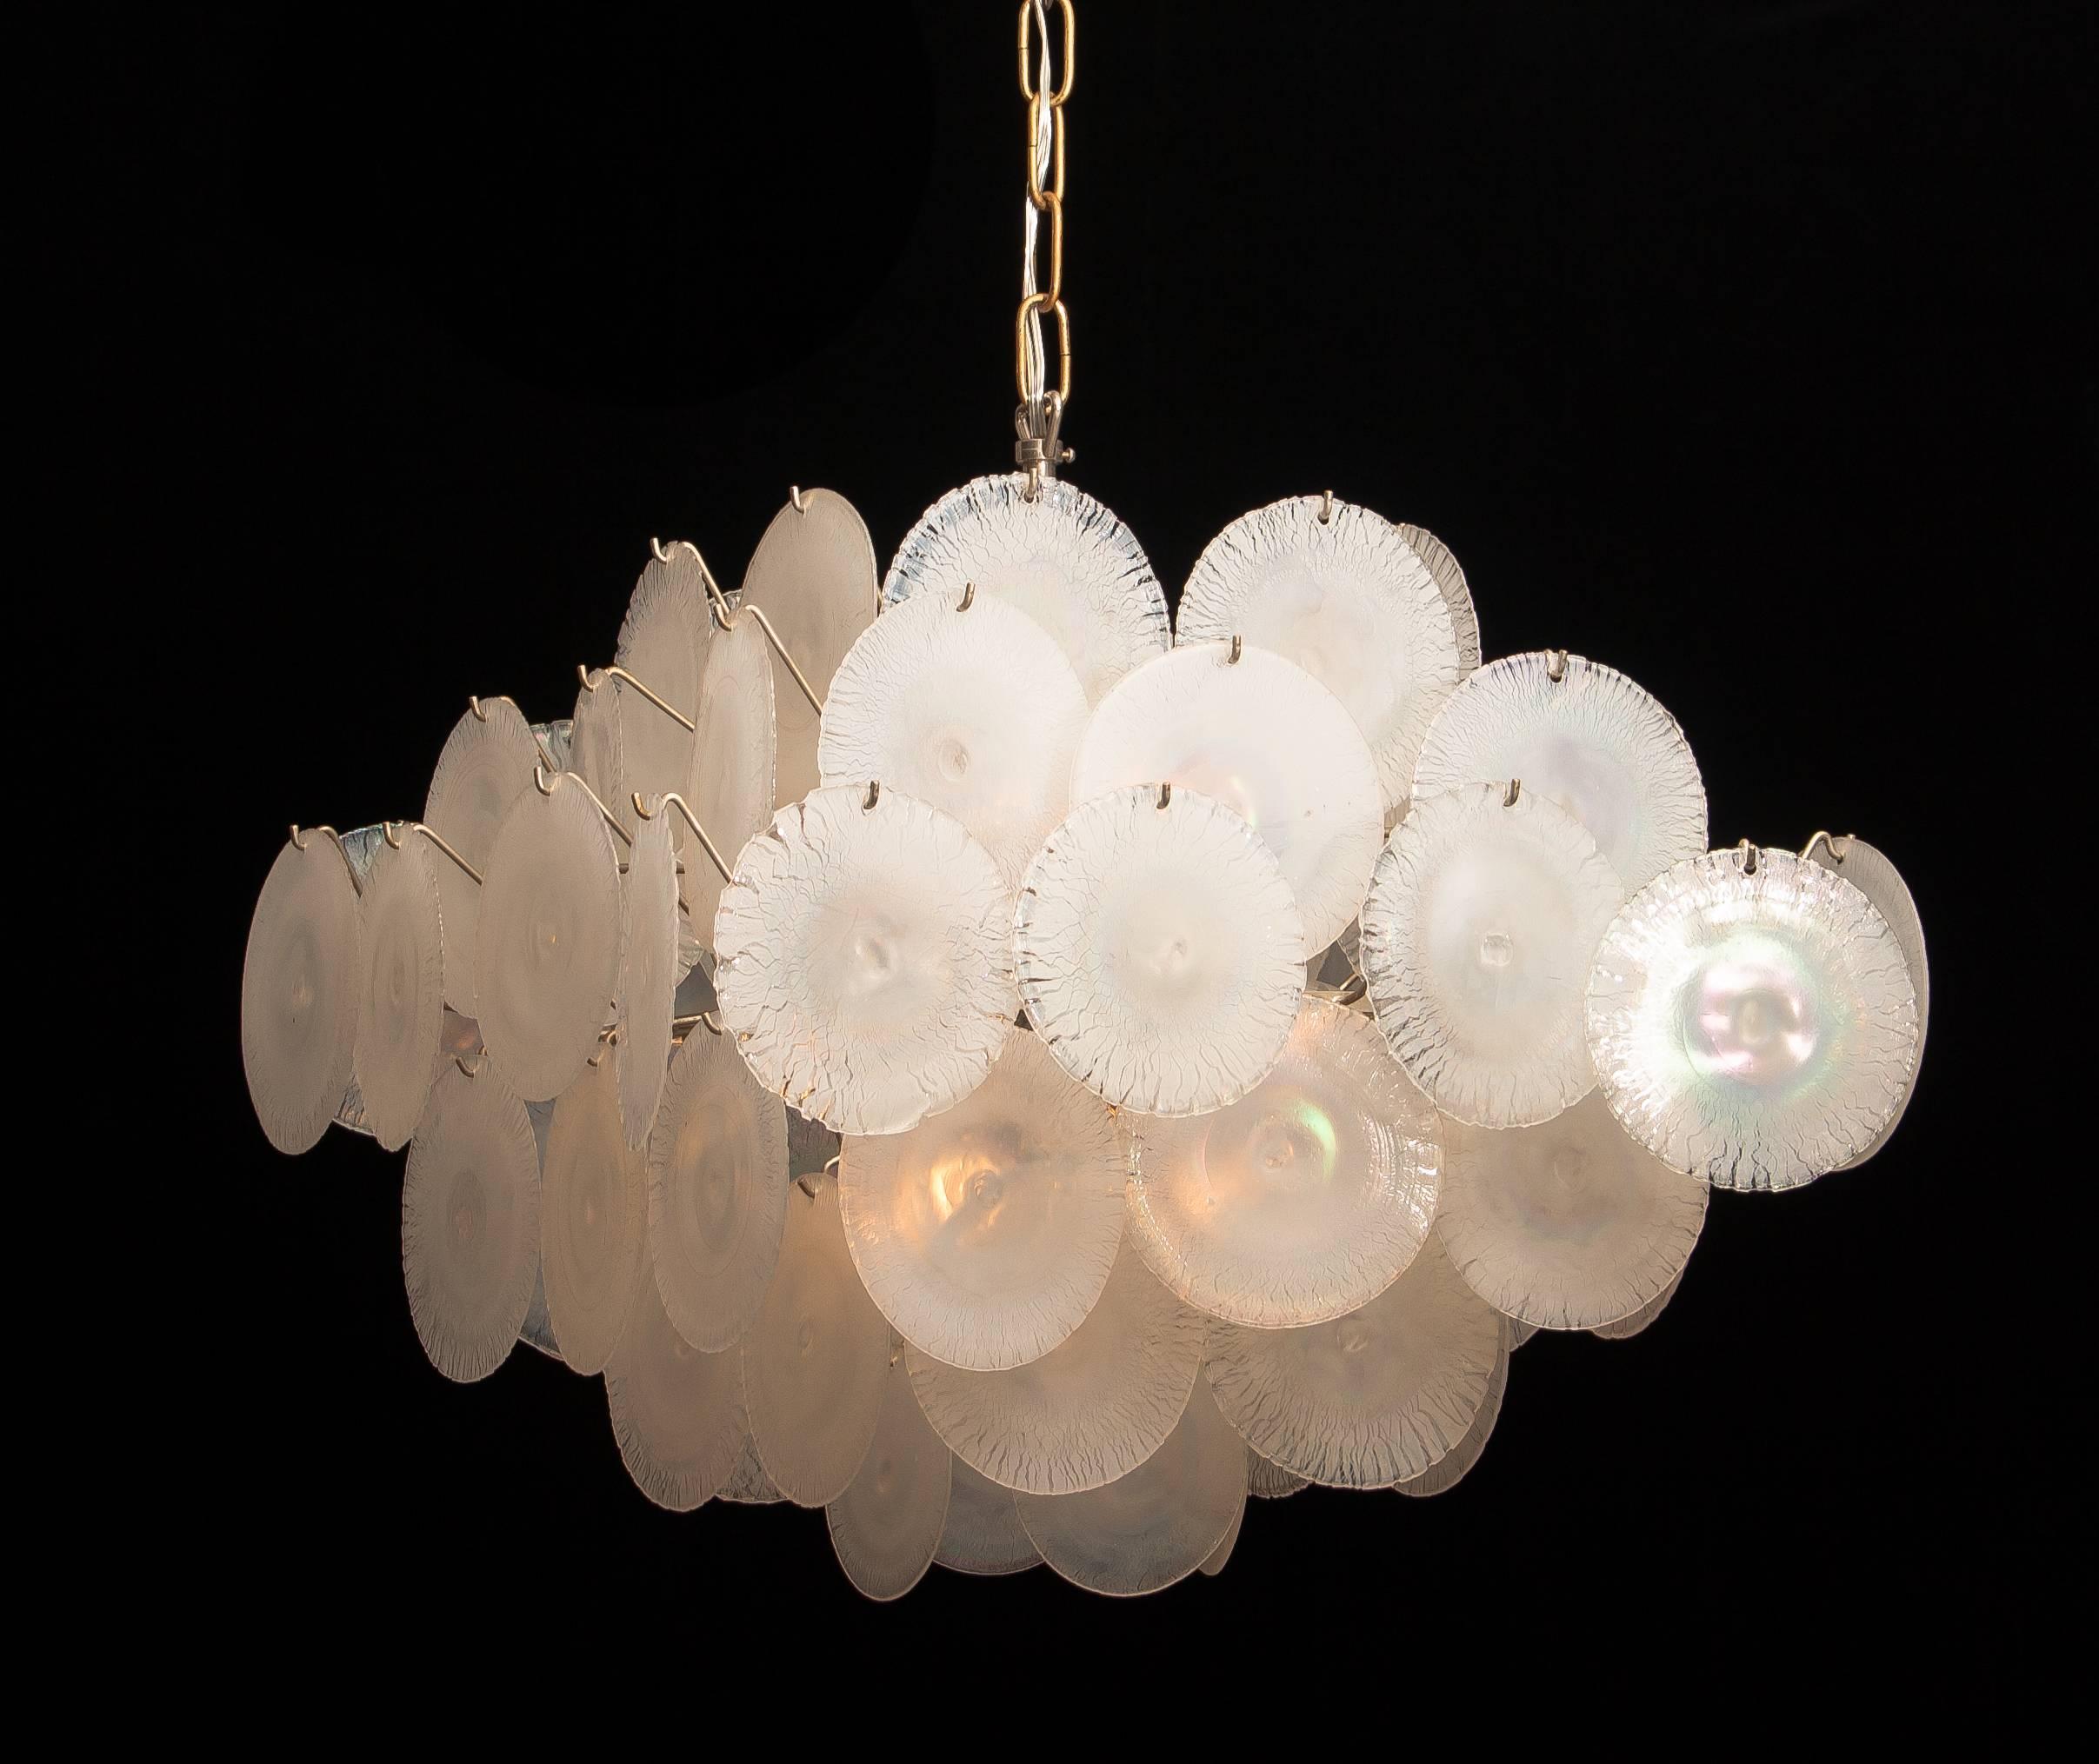 Gino Vistosi Chandelier with White or Pearl Murano Crystal Discs 3